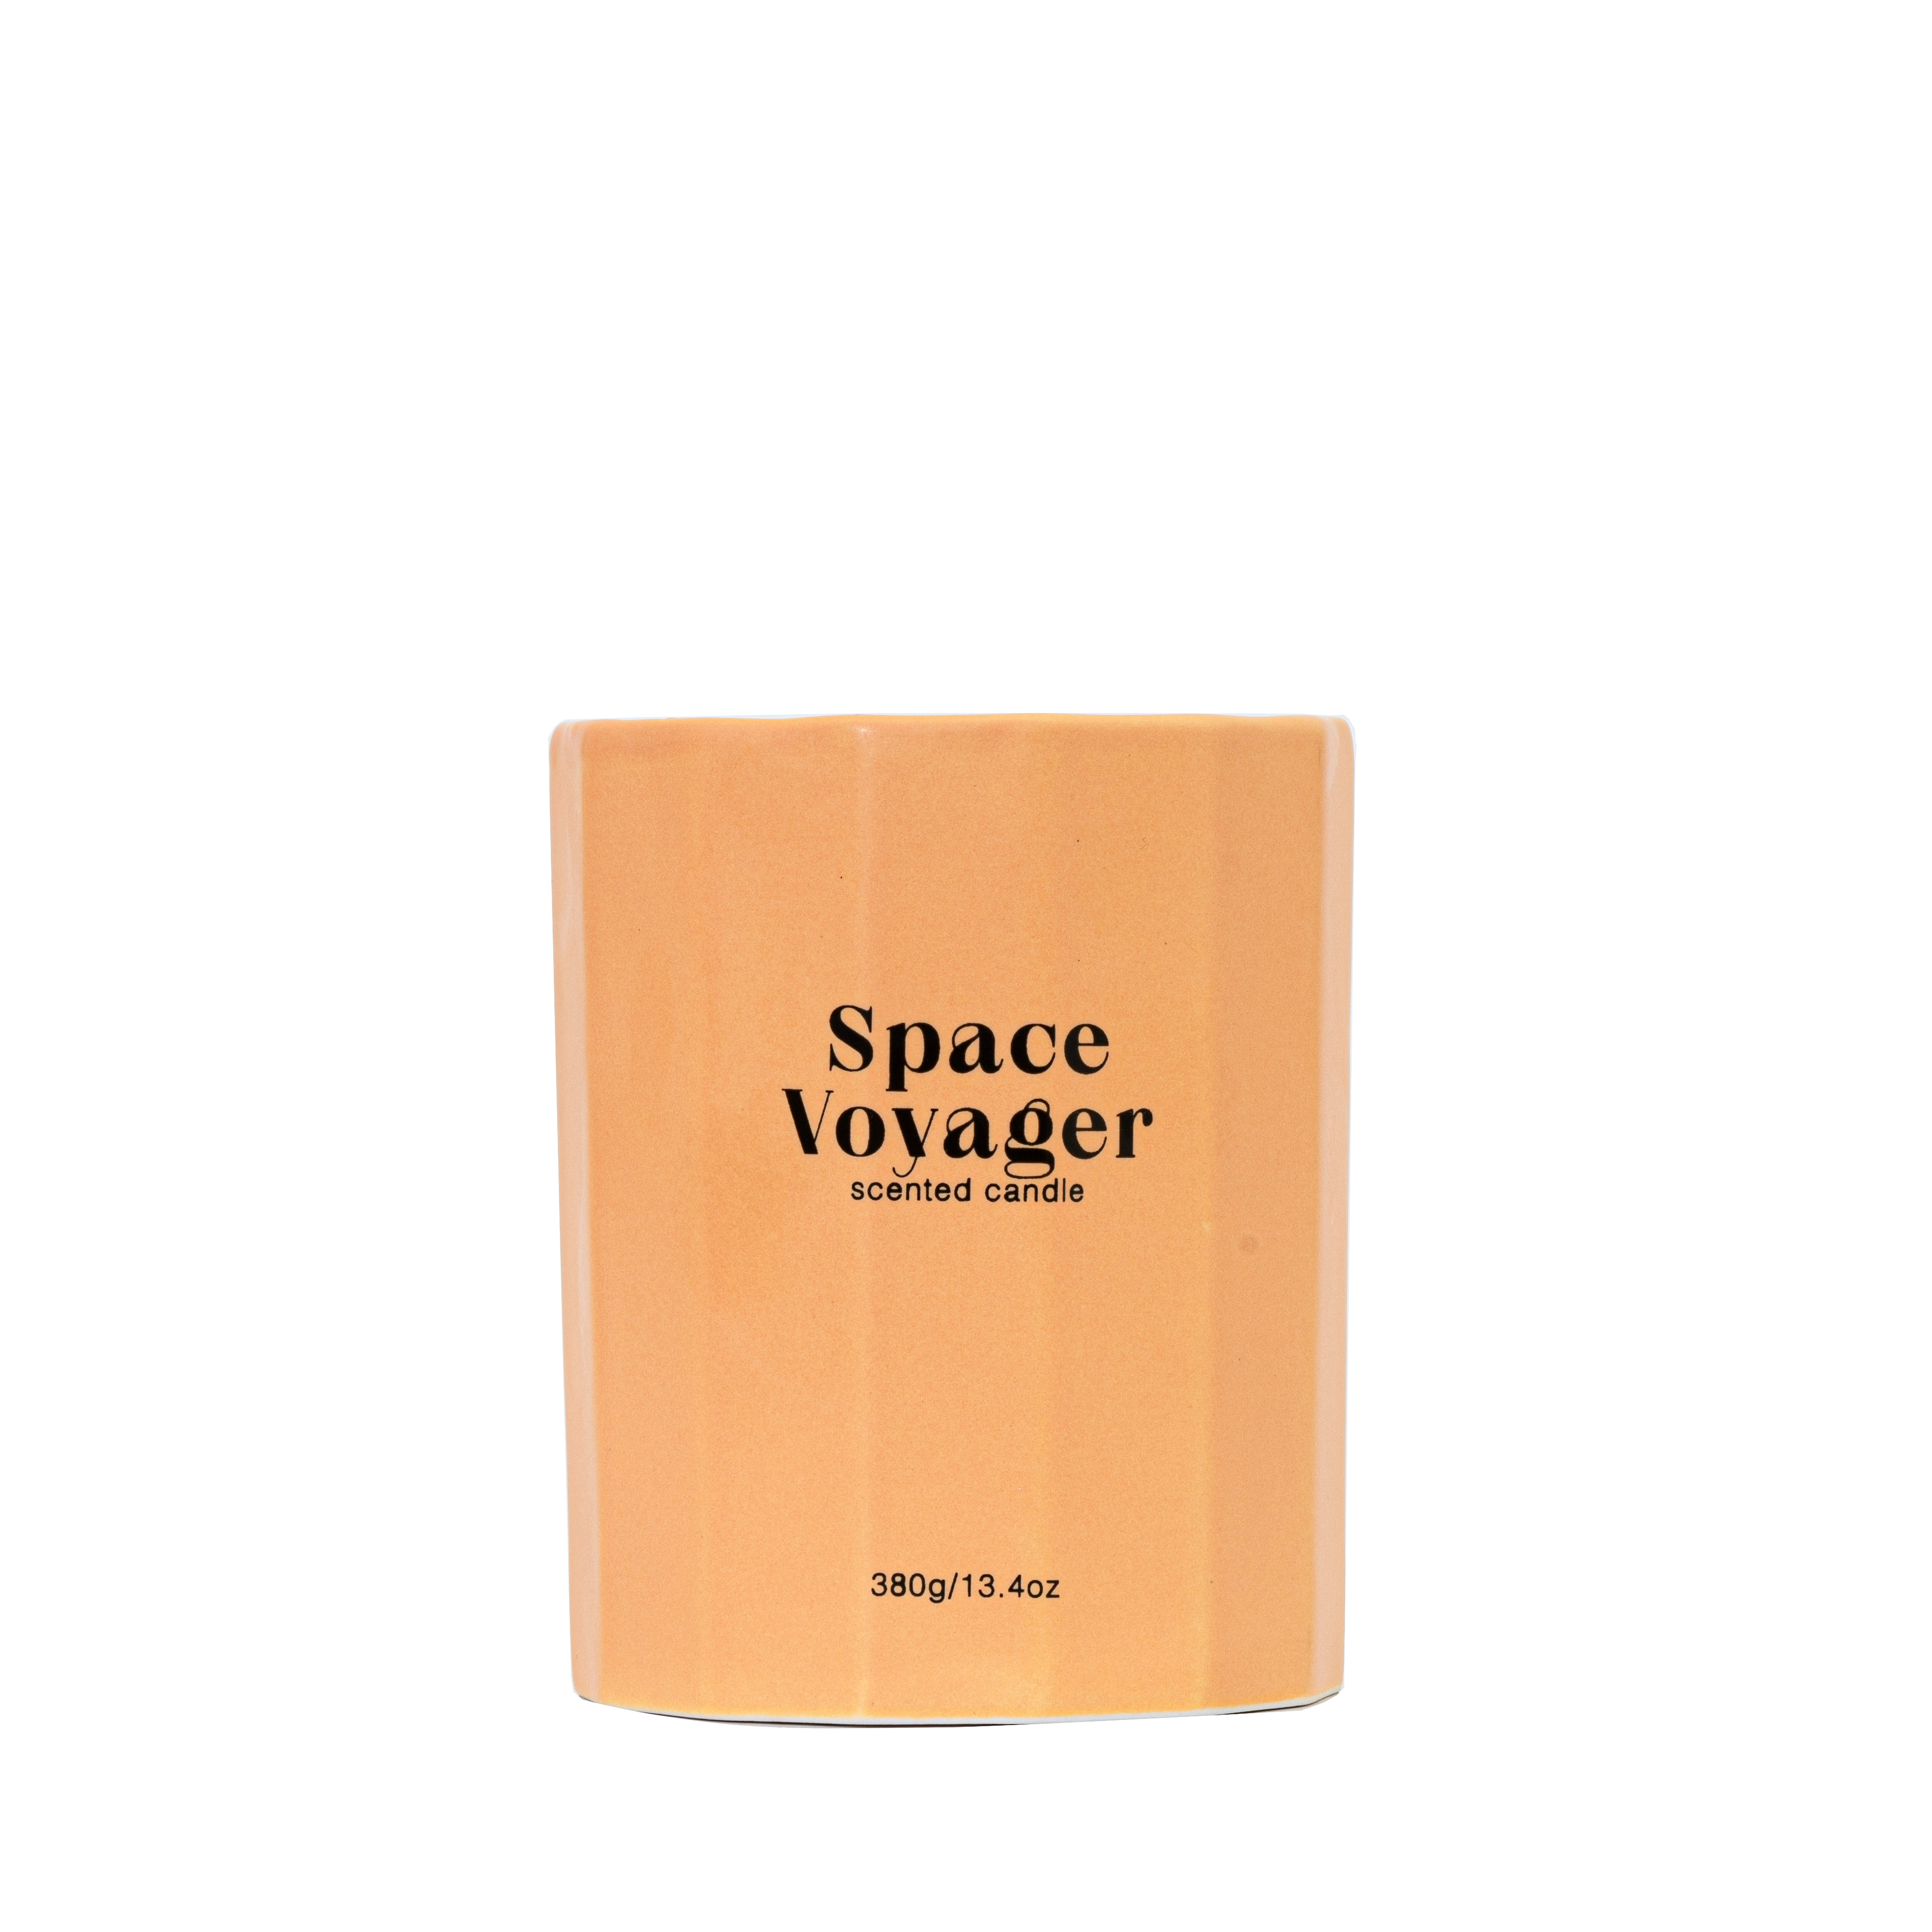 WOODWICK IS ON Collection Scented Candle Space Voyager Orange Ceramic Jar 380g